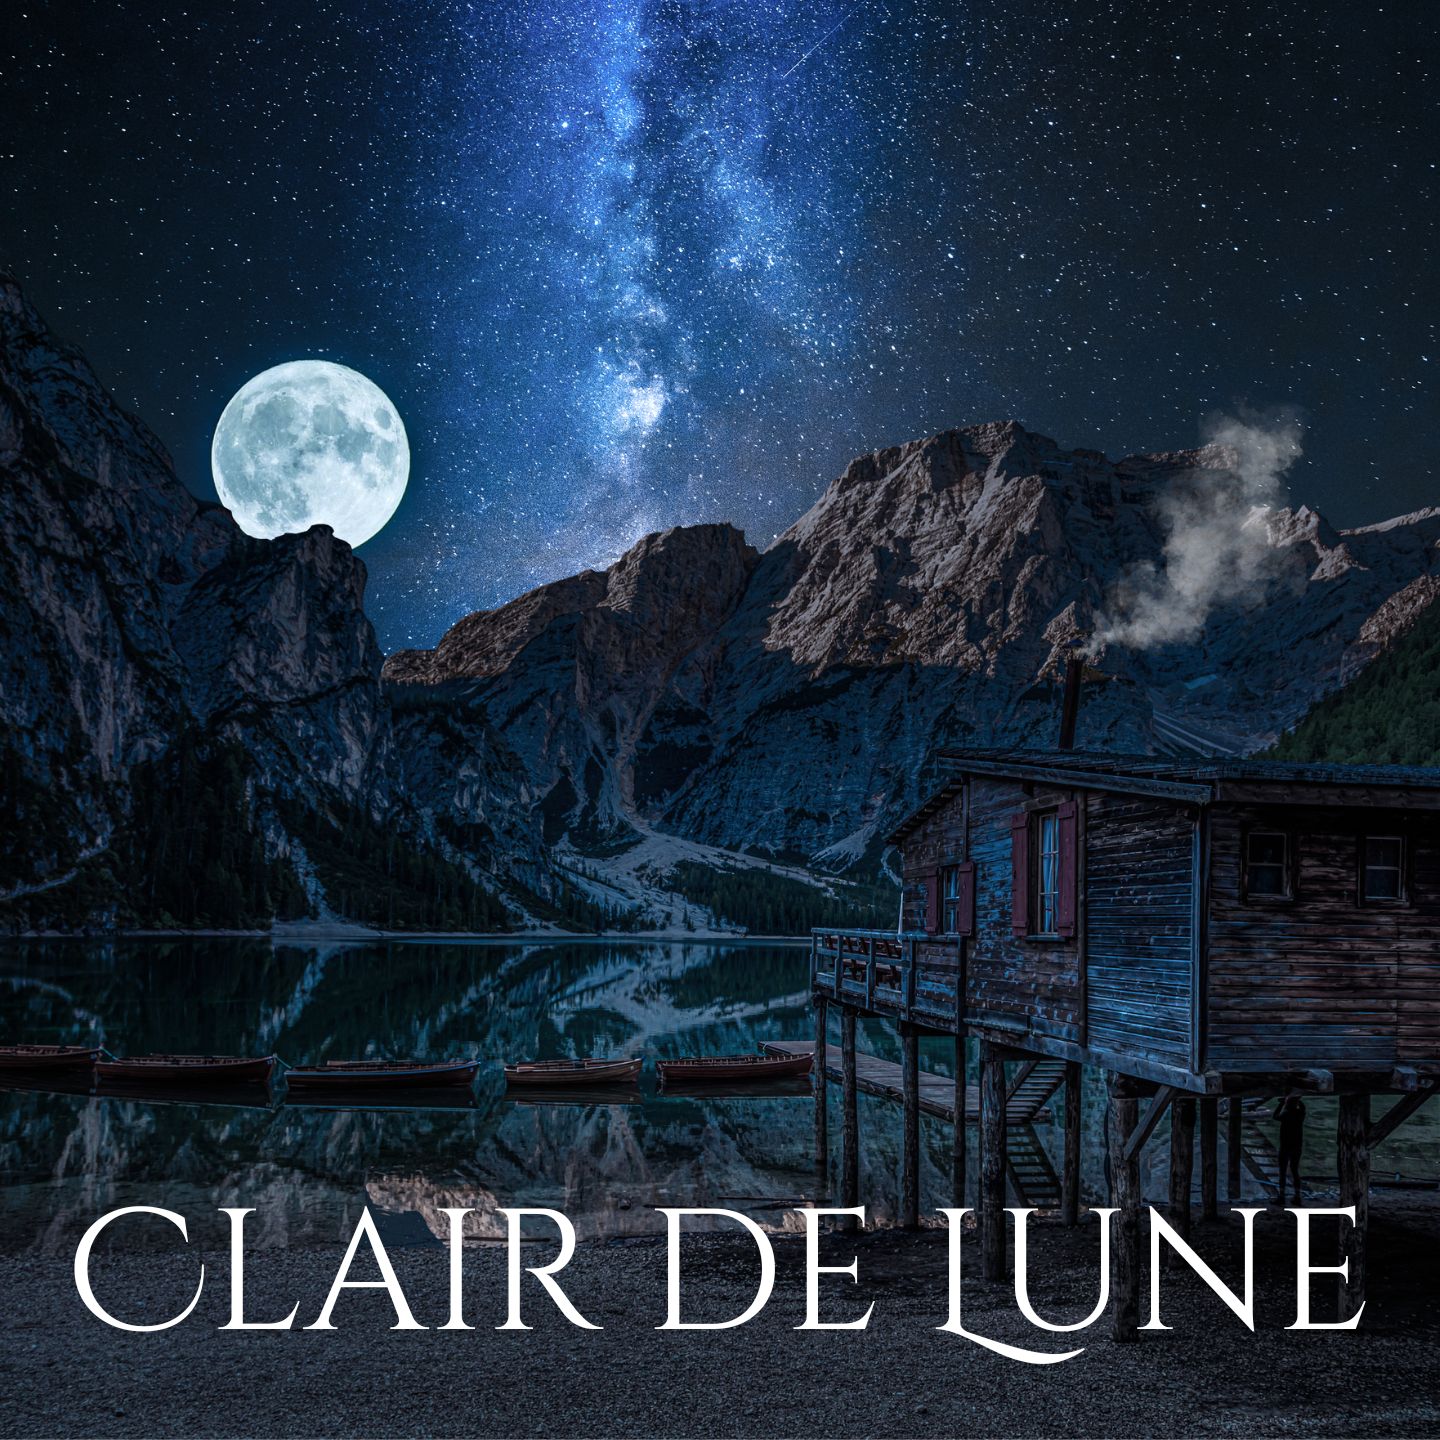 Clair de Lune: Classical Music by the Moonlight